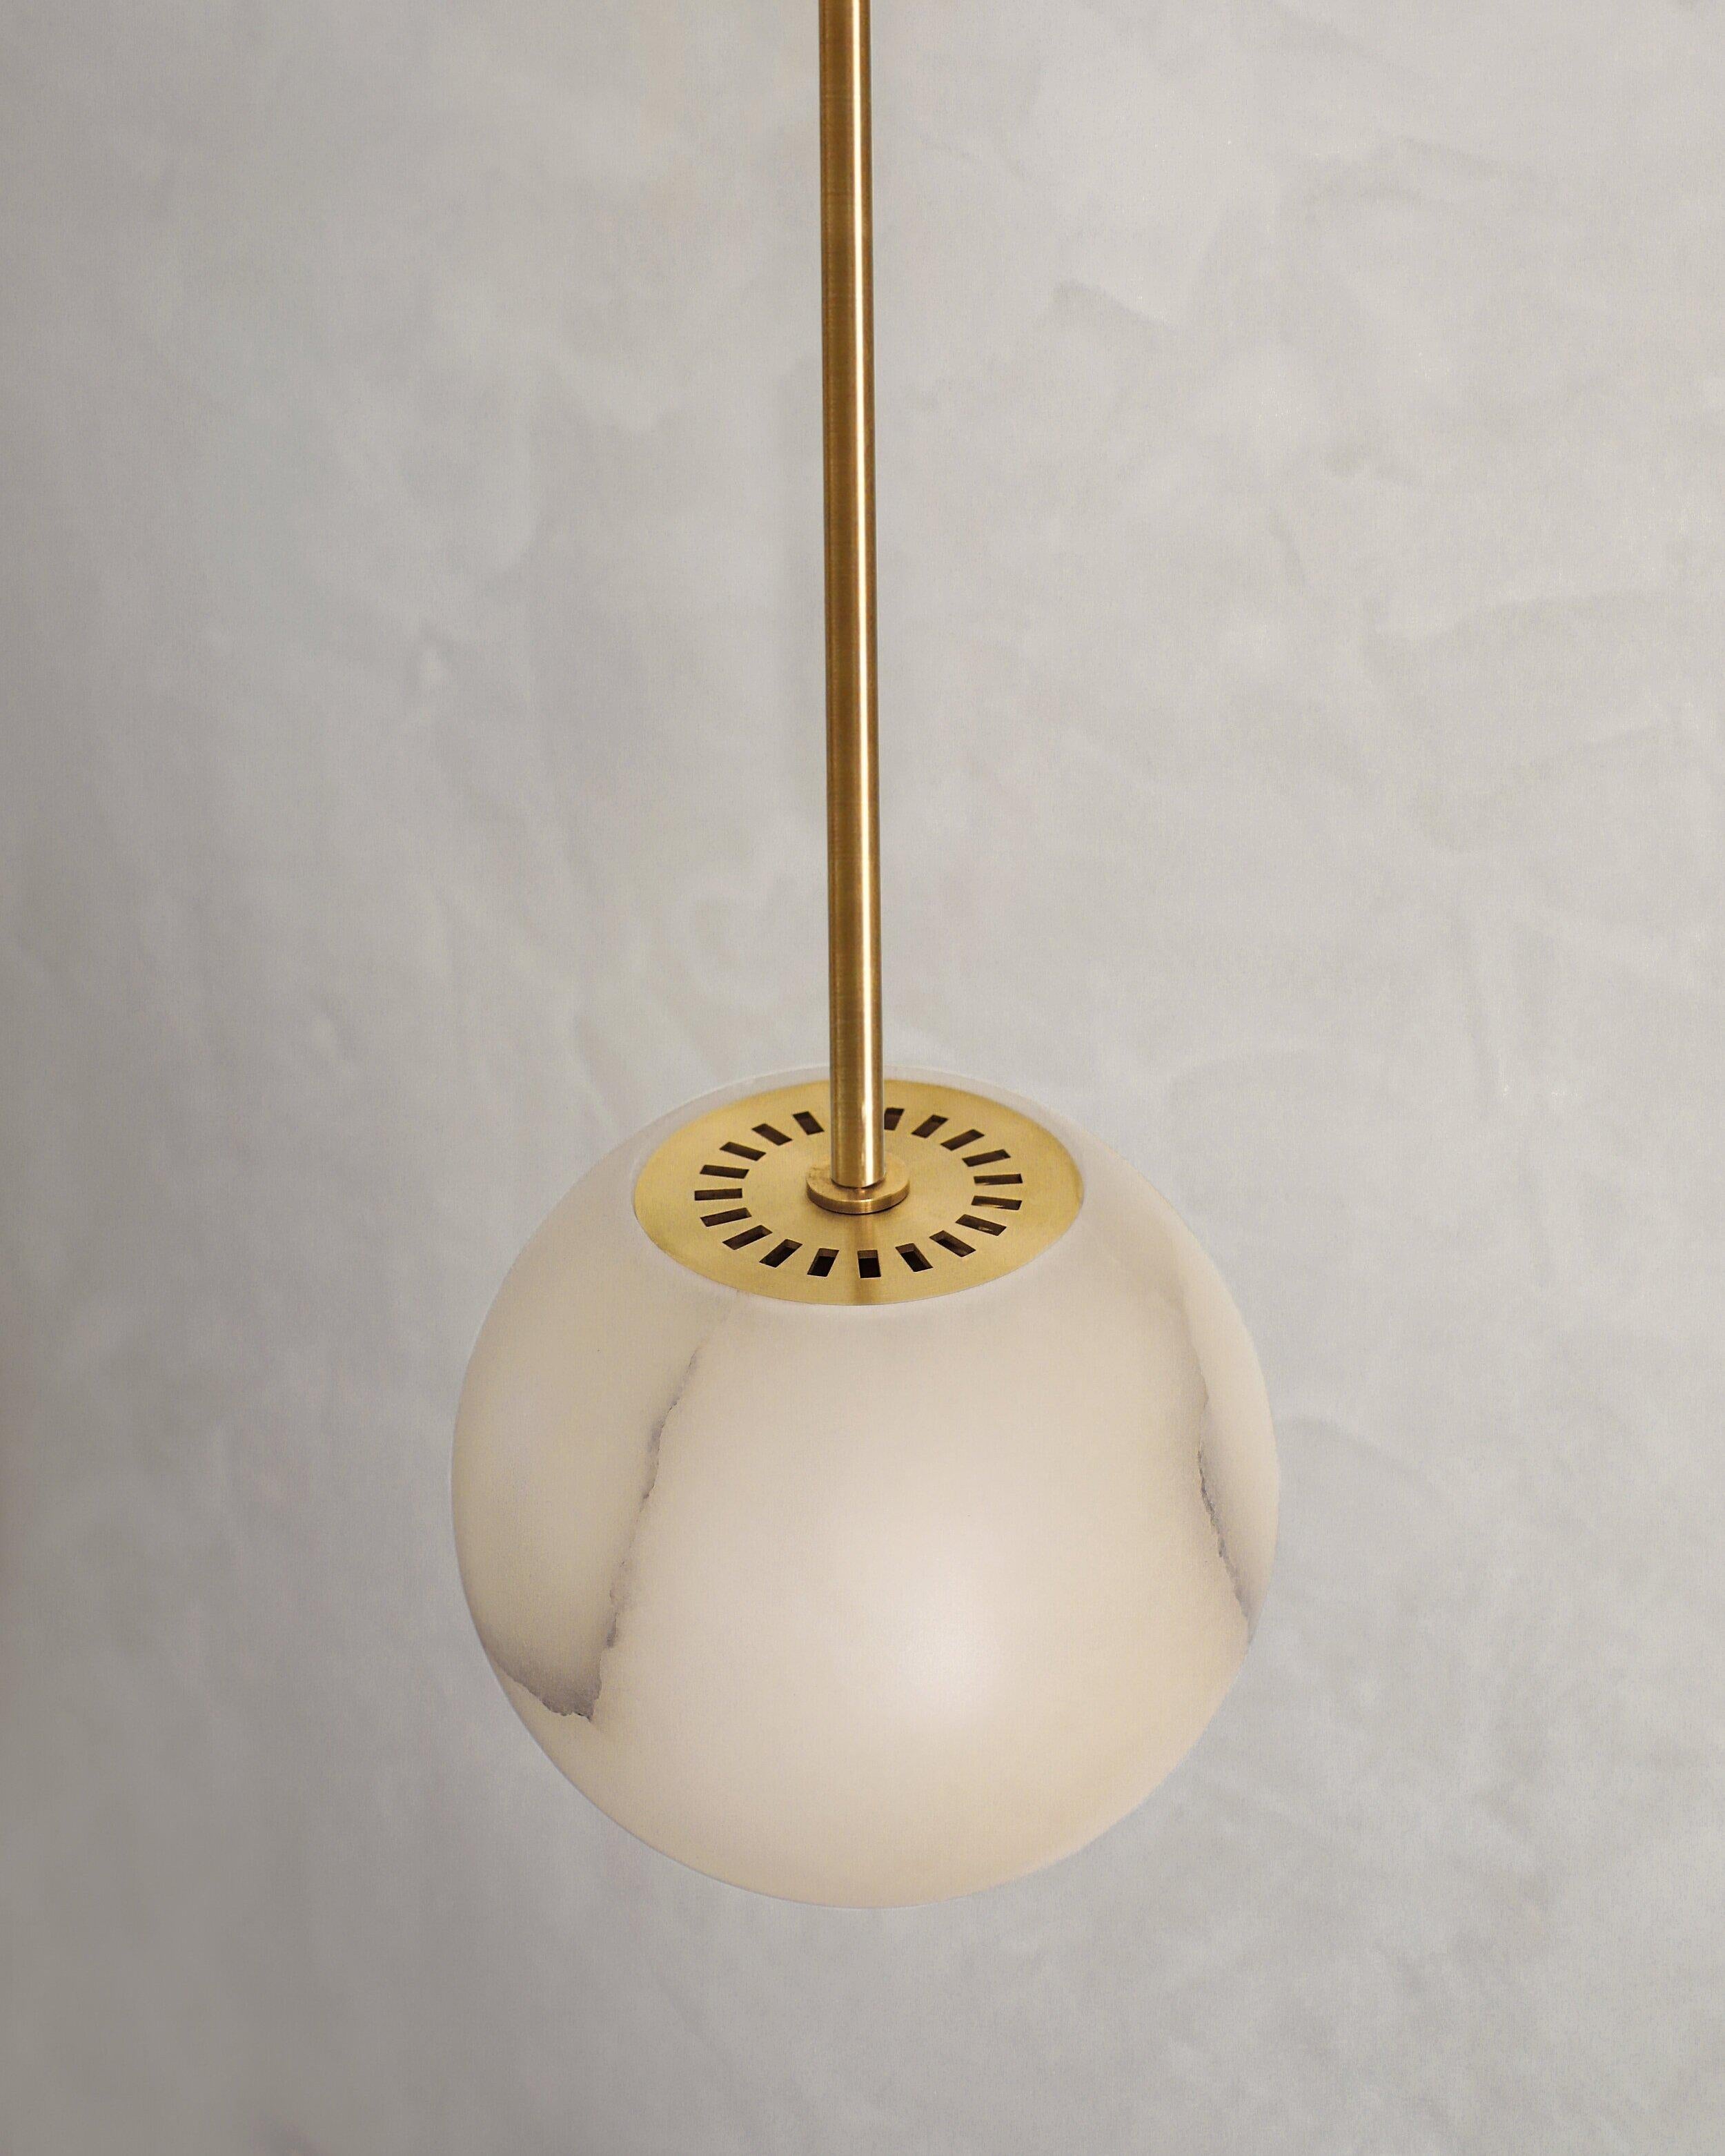 Planette tube 18 pendant by Contain
Dimensions: Ø 18 x H 100 cm (custom lenght).
Materials: Alabaster, brass.

Also available in different finishes and dimensions (Ø10 cm / Ø16,5 cm / Ø18 cm / Ø22 cm x custom length). Please contact us.

All